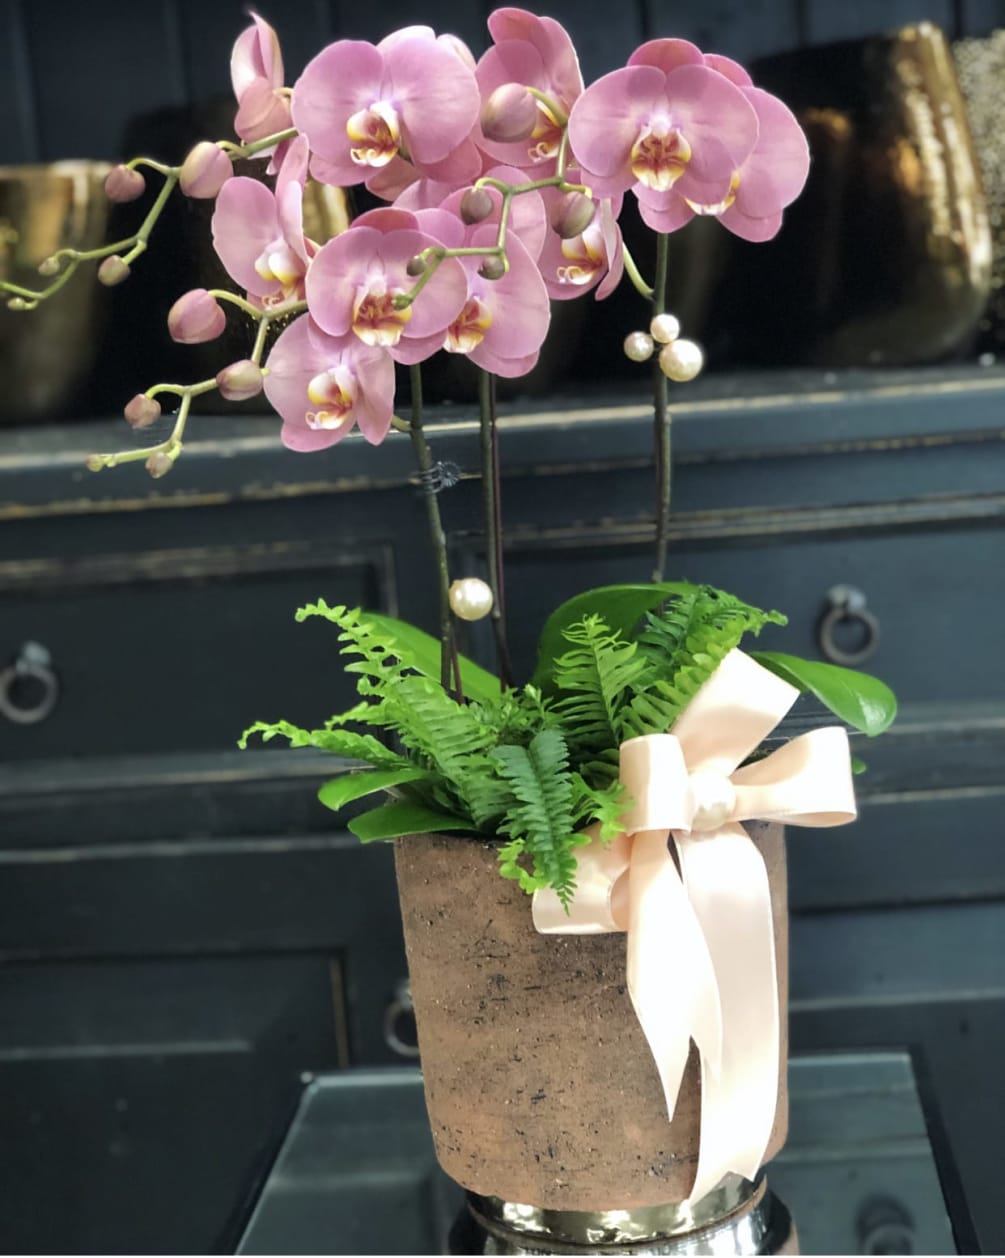 An assortment of dusty rose phalaenopsis orchids accented with ribbon and pearls